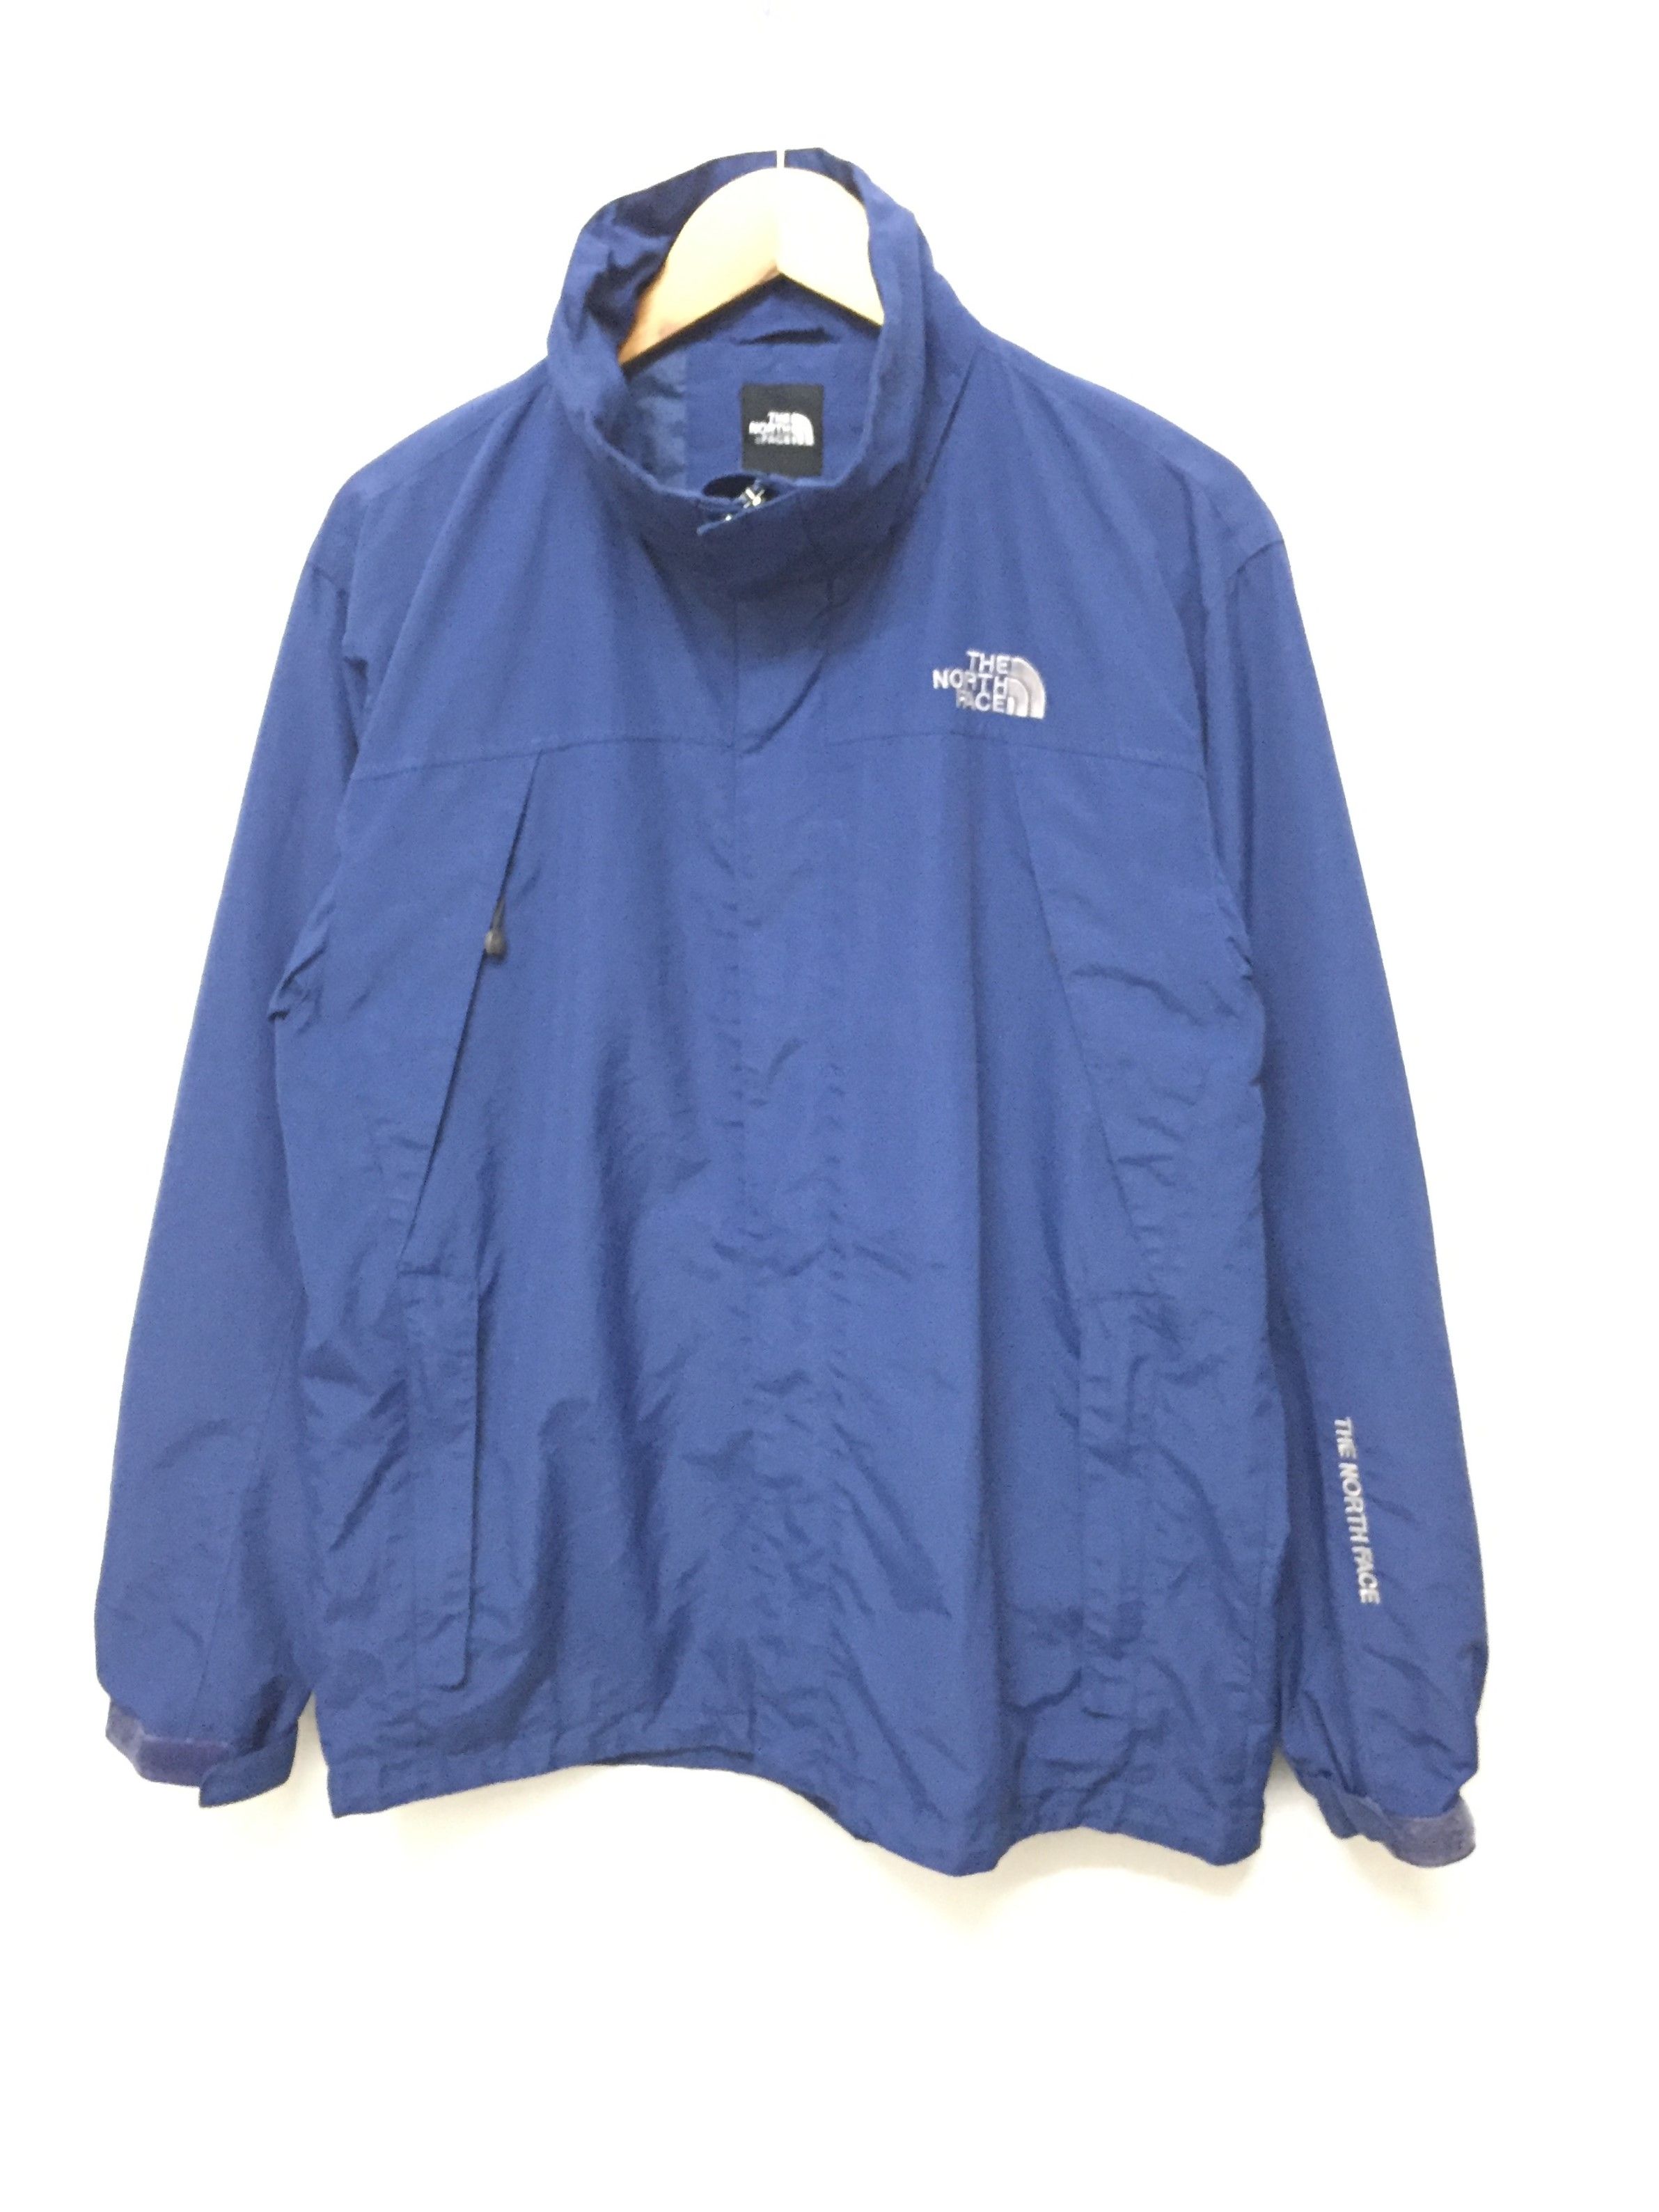 The North Face 90s The NORTH FACE Multipocket parka jacket | Grailed